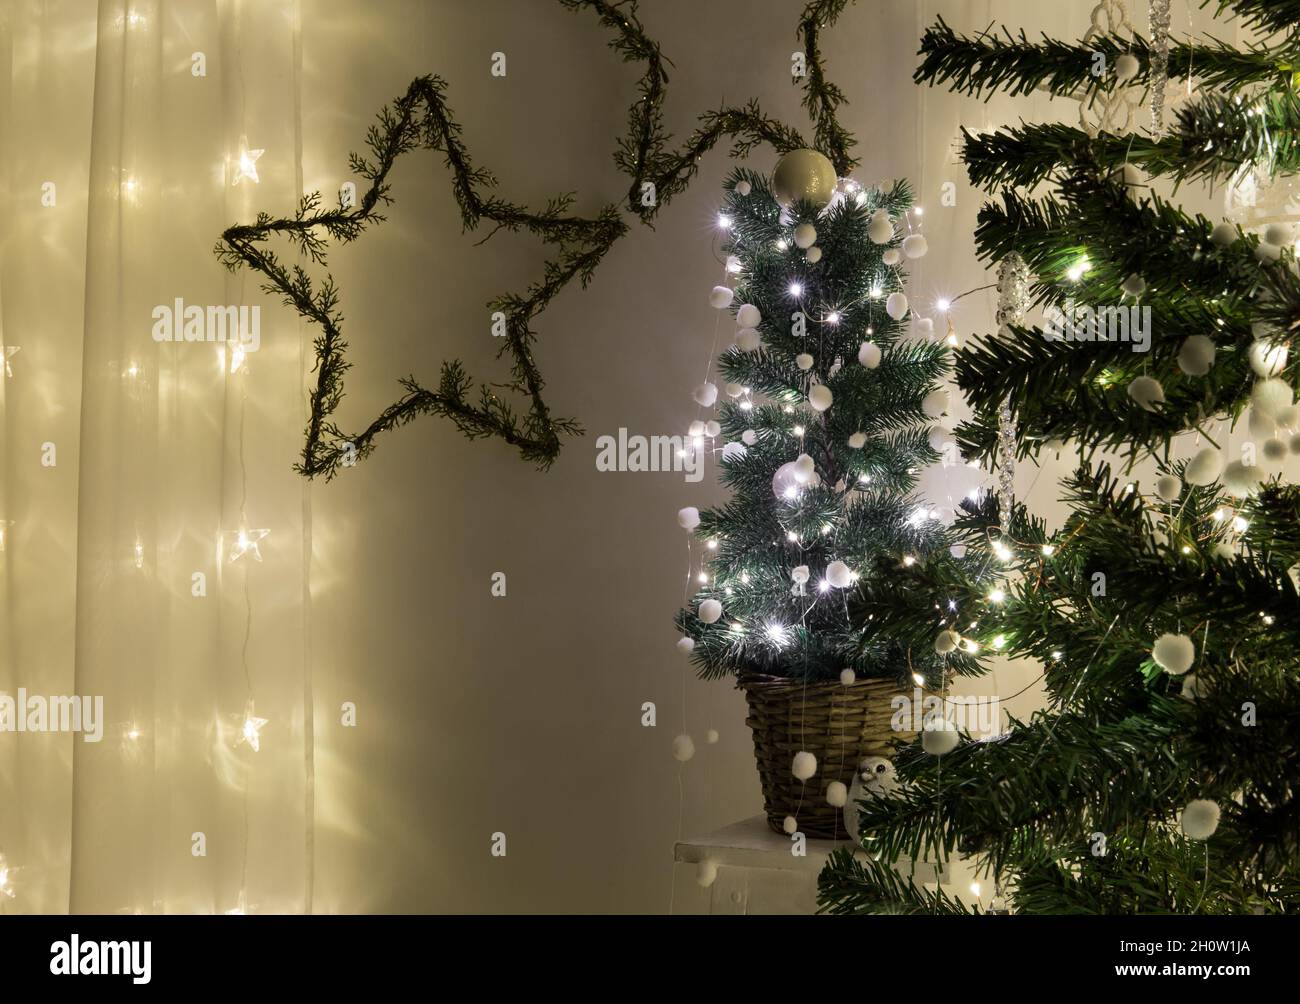 Cute potted Christmas tree decorated with wire micro led lights and small white decorative balls pom poms or felt ball garland indoors at night. Stock Photo